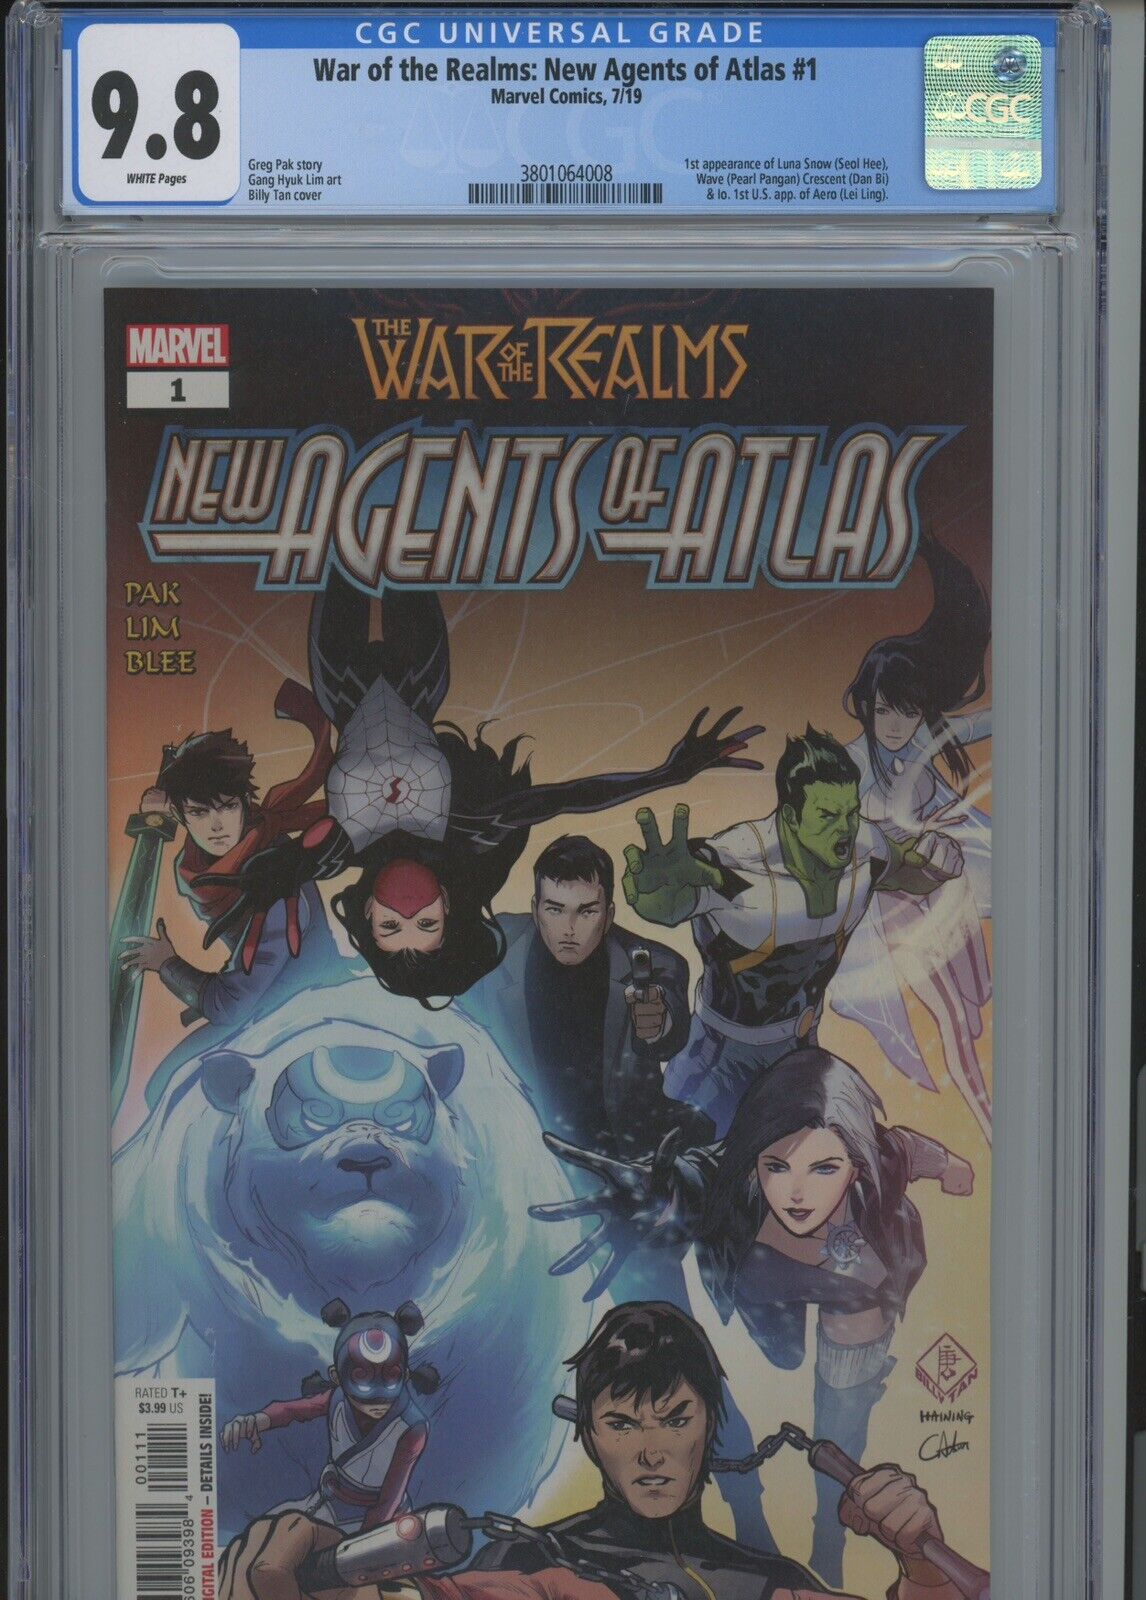 War of the Realms: New Agents of Atlas #1 2019 CGC 9.8